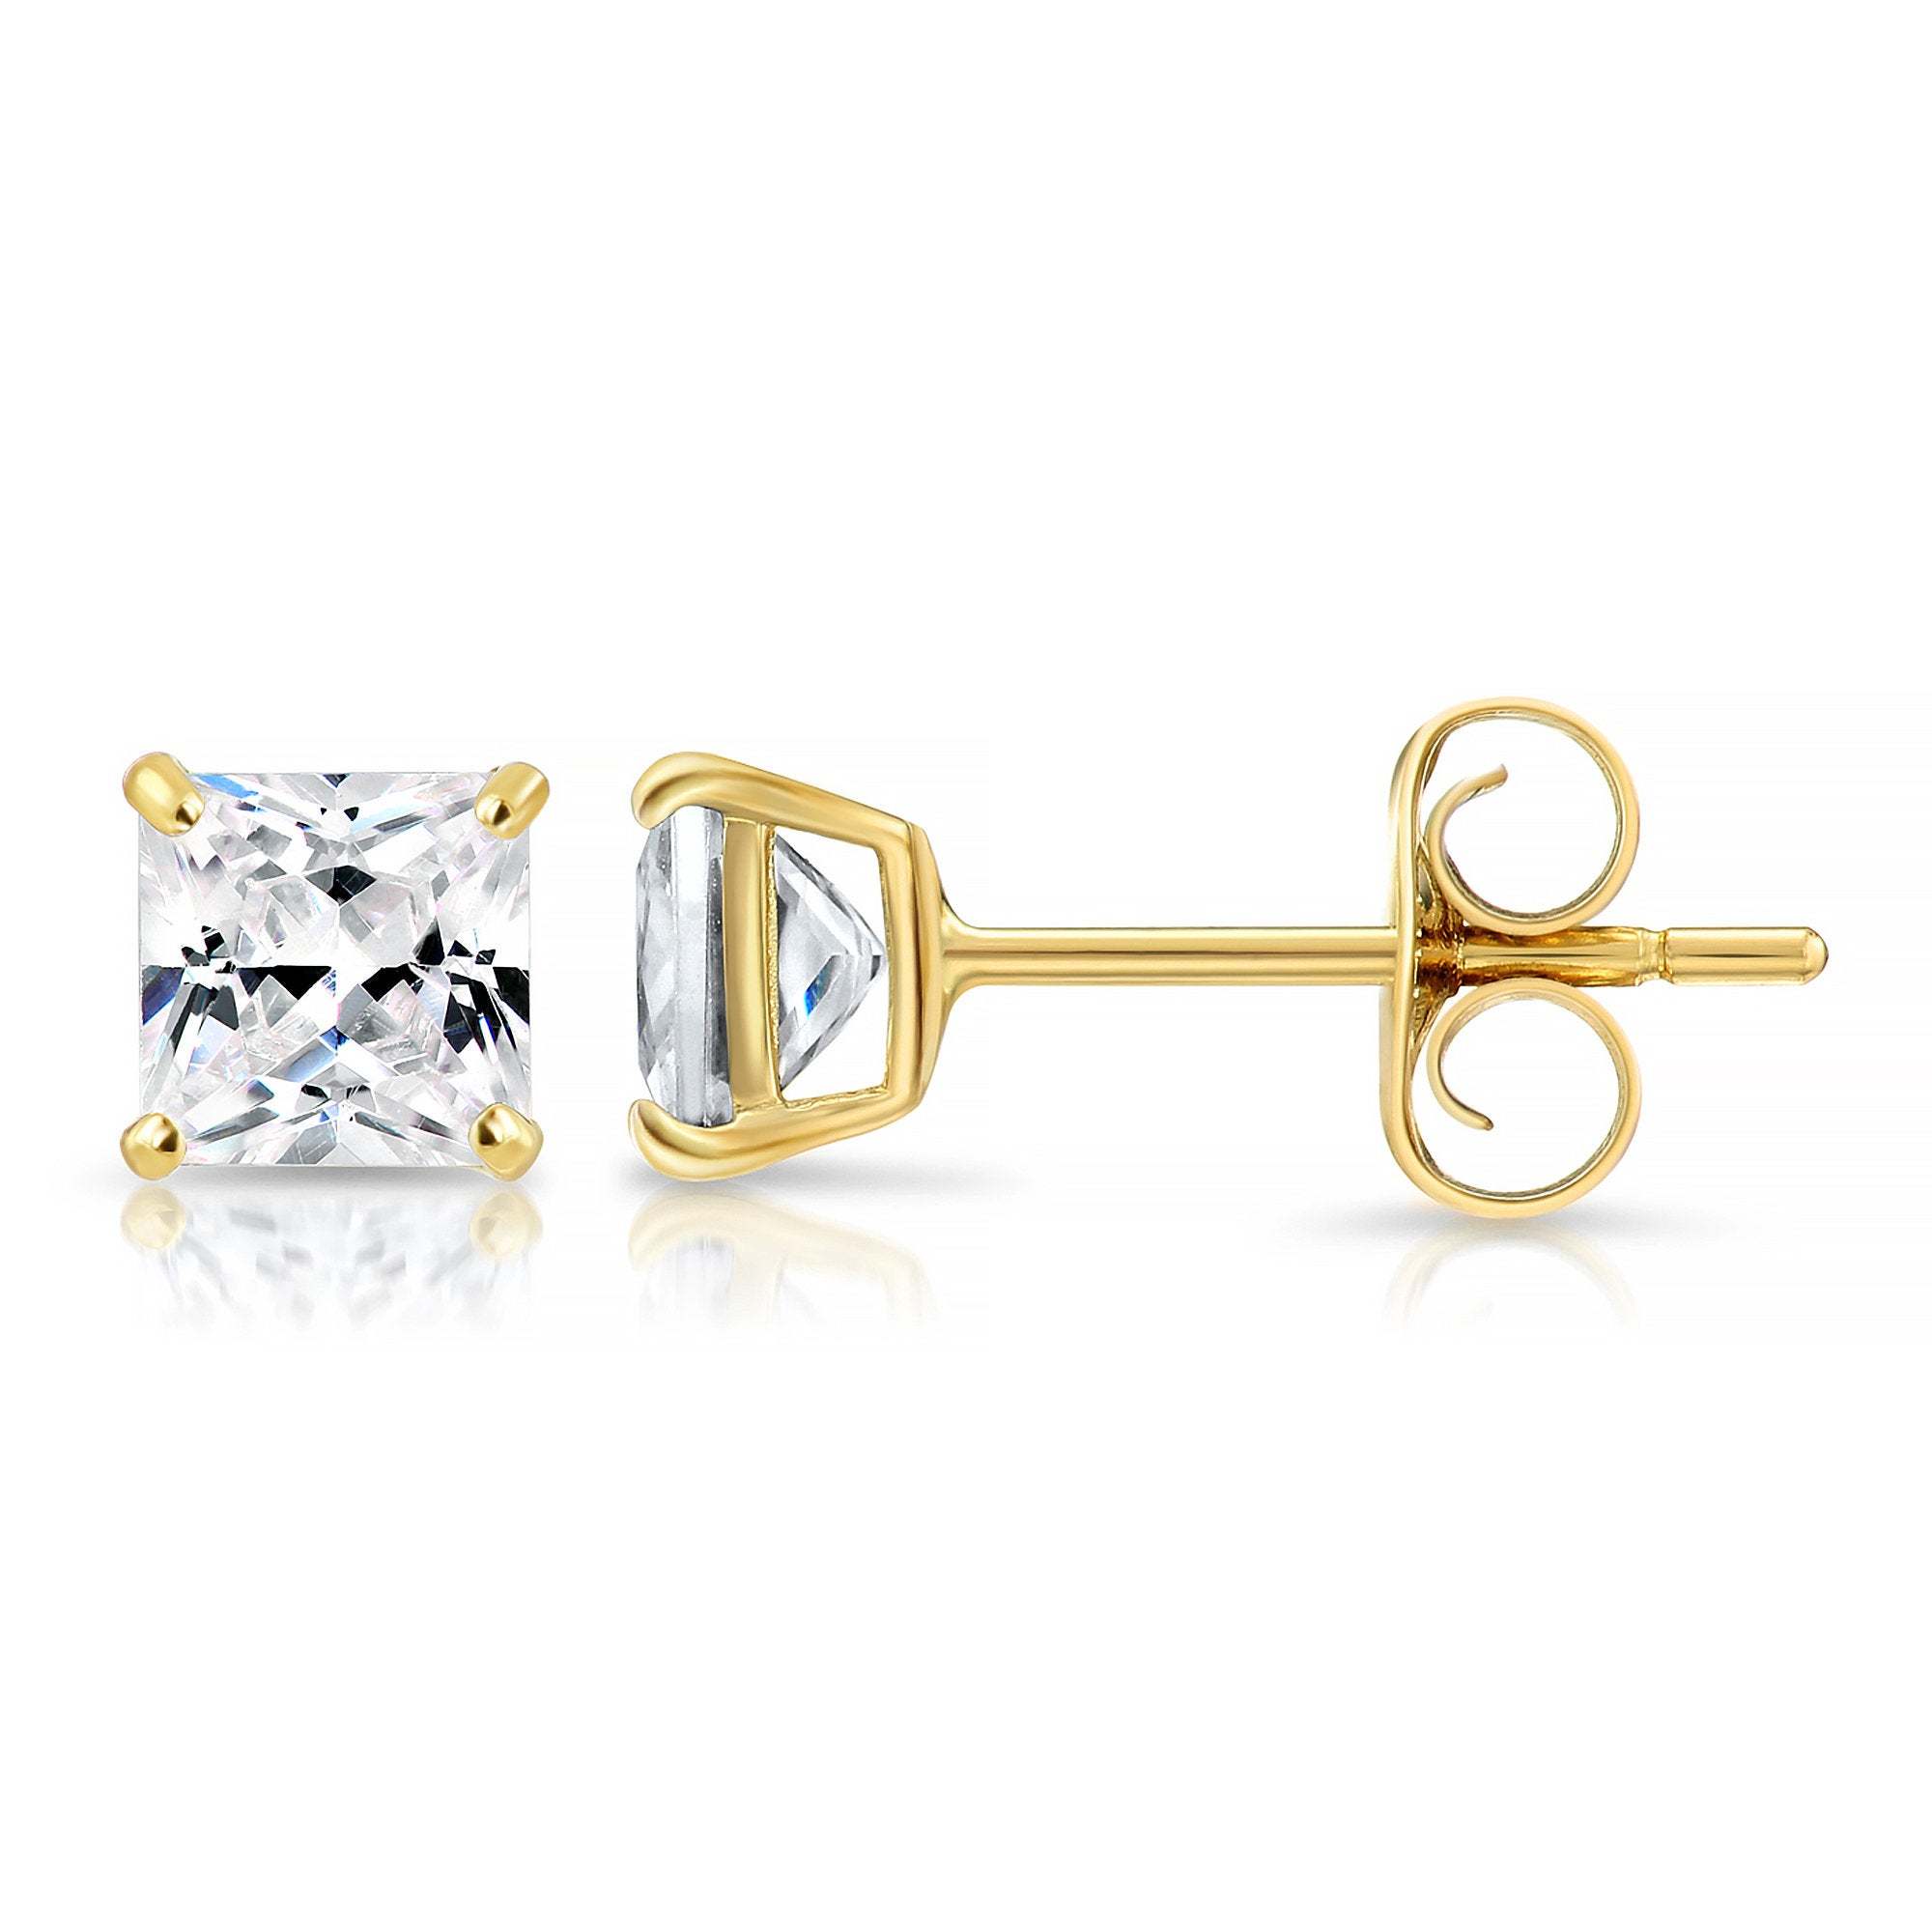 Bundle SET OF 3! 14K Solid Gold Earrings, Square Studs with Cubic Zirconia Stones and 14K Solid Gold Butterfly Push-backings